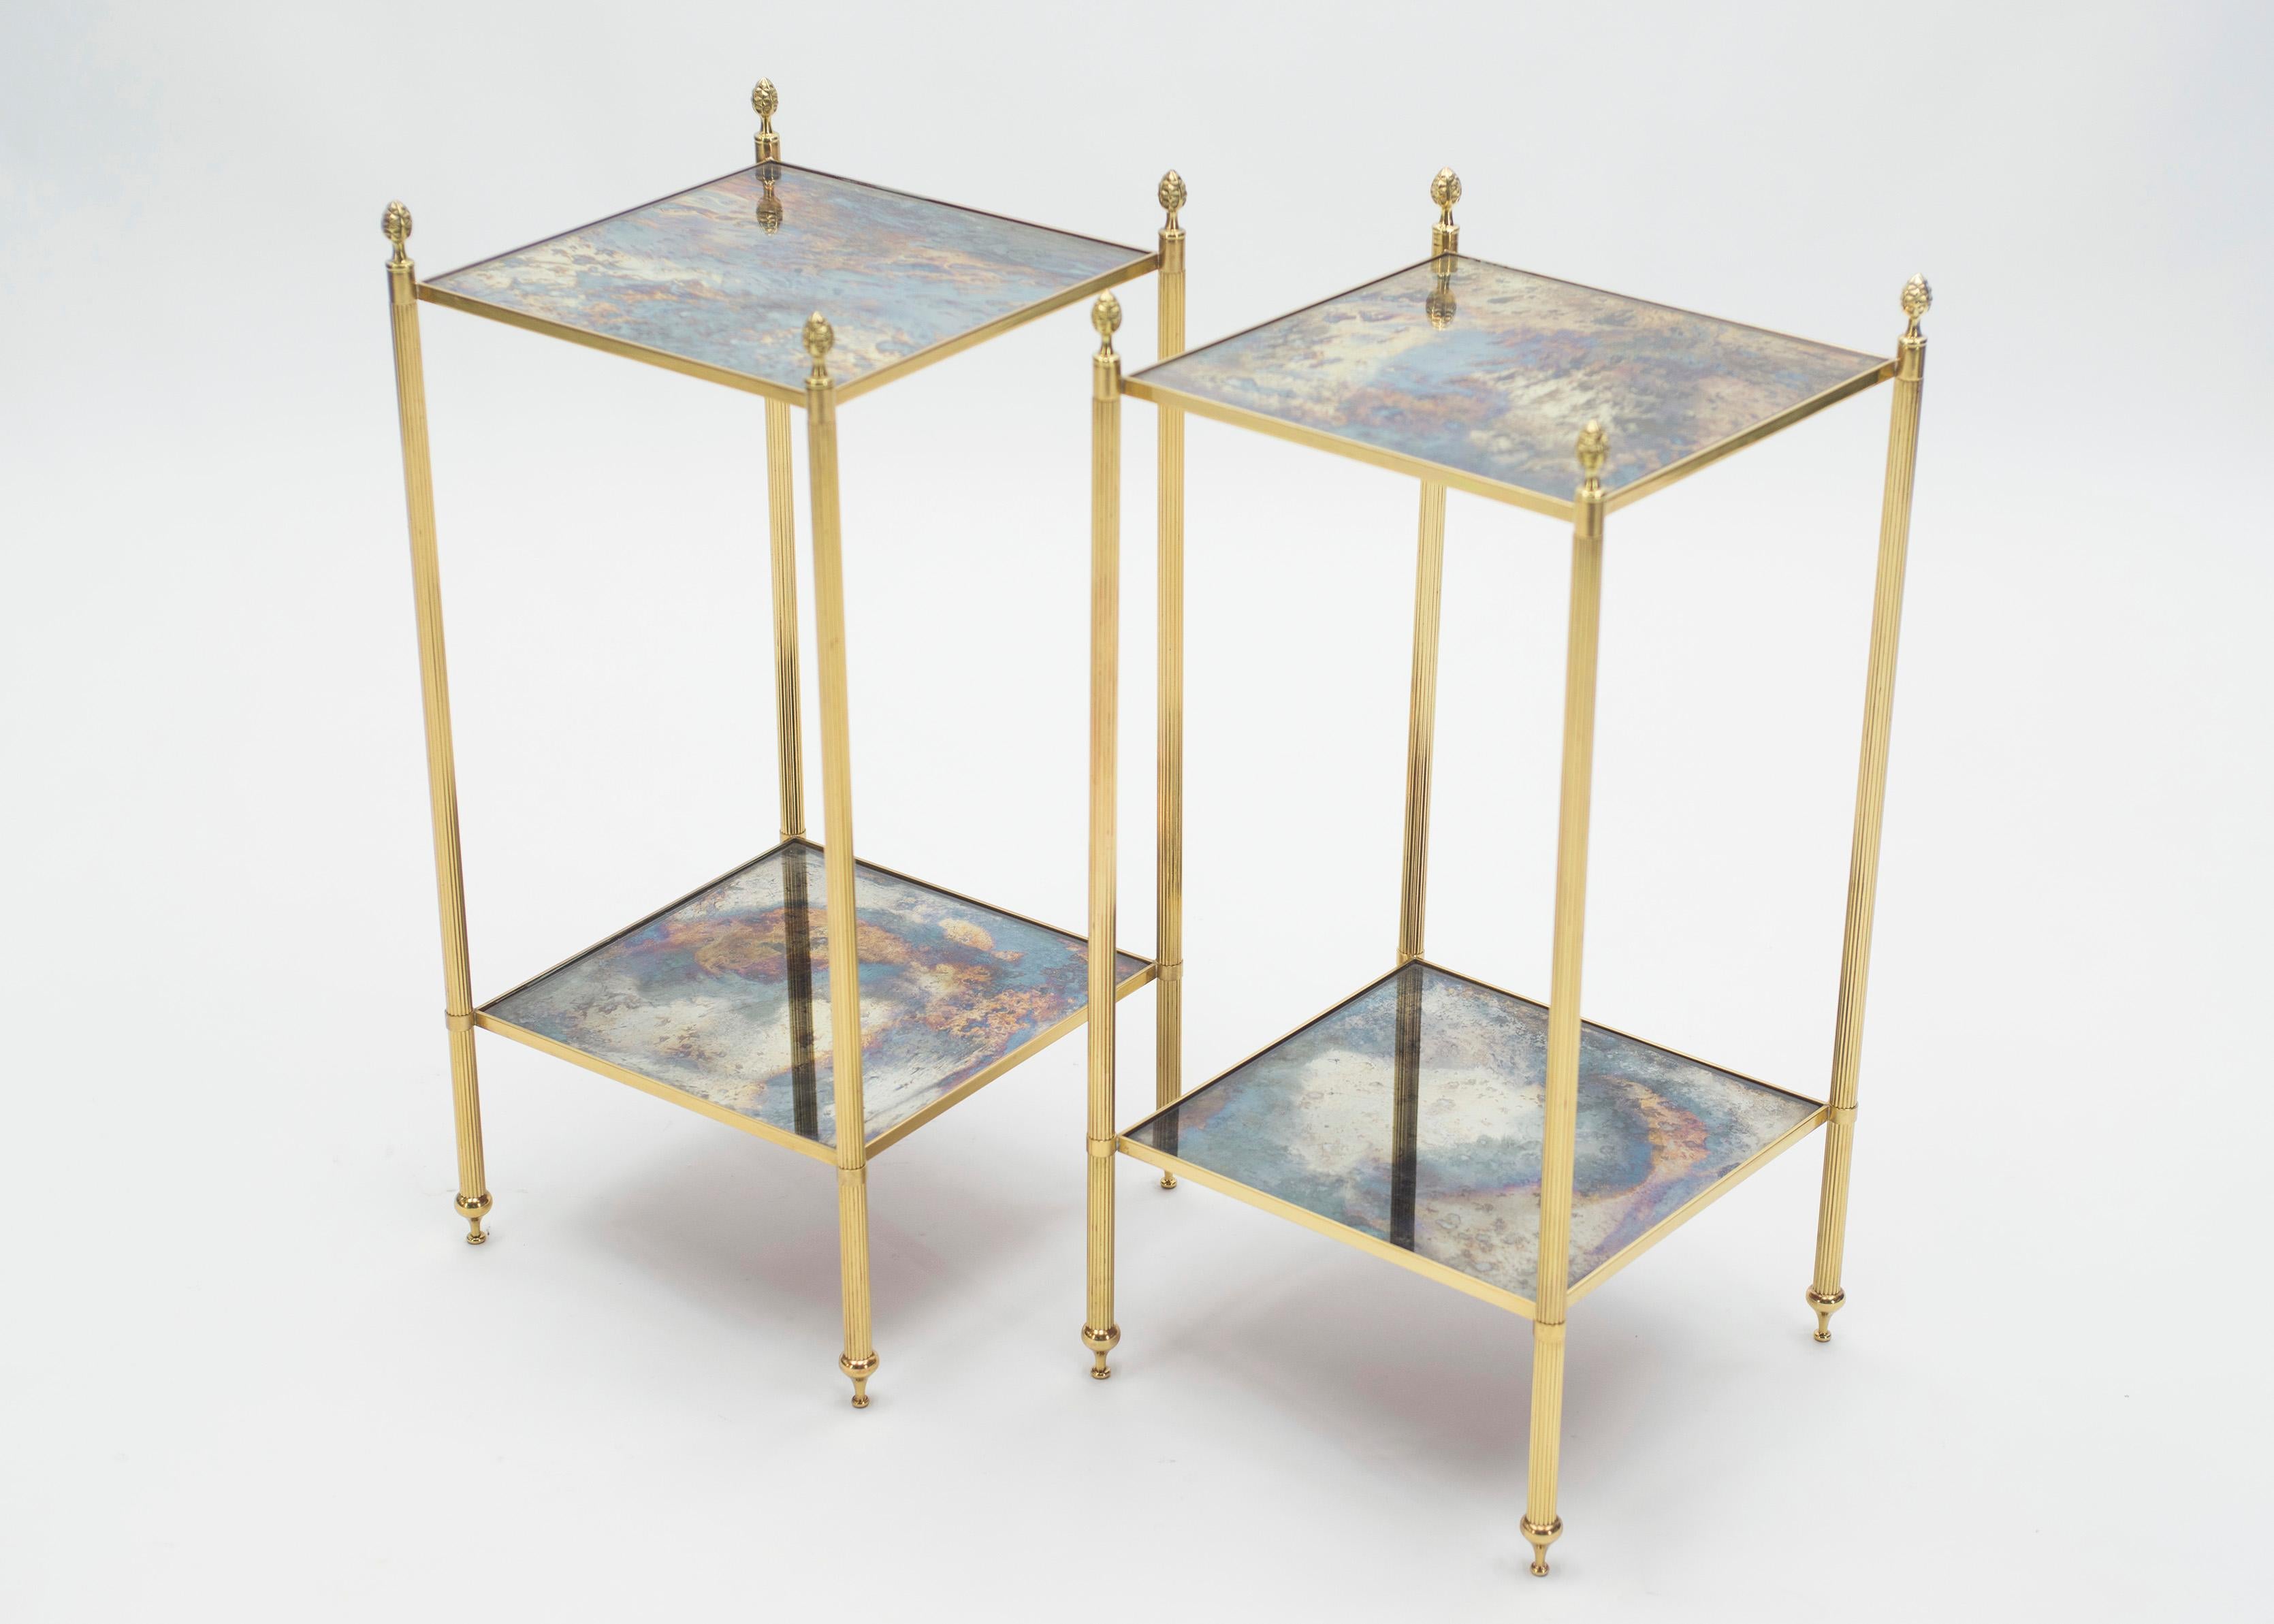 This pair of two-tier end tables by French design house Maison Jansen was created with solid brass, typical French neoclassical pine cone, and beautiful old patina mirror, circa 1960. The two-tier mirrors are timeless and smooth, while the brass